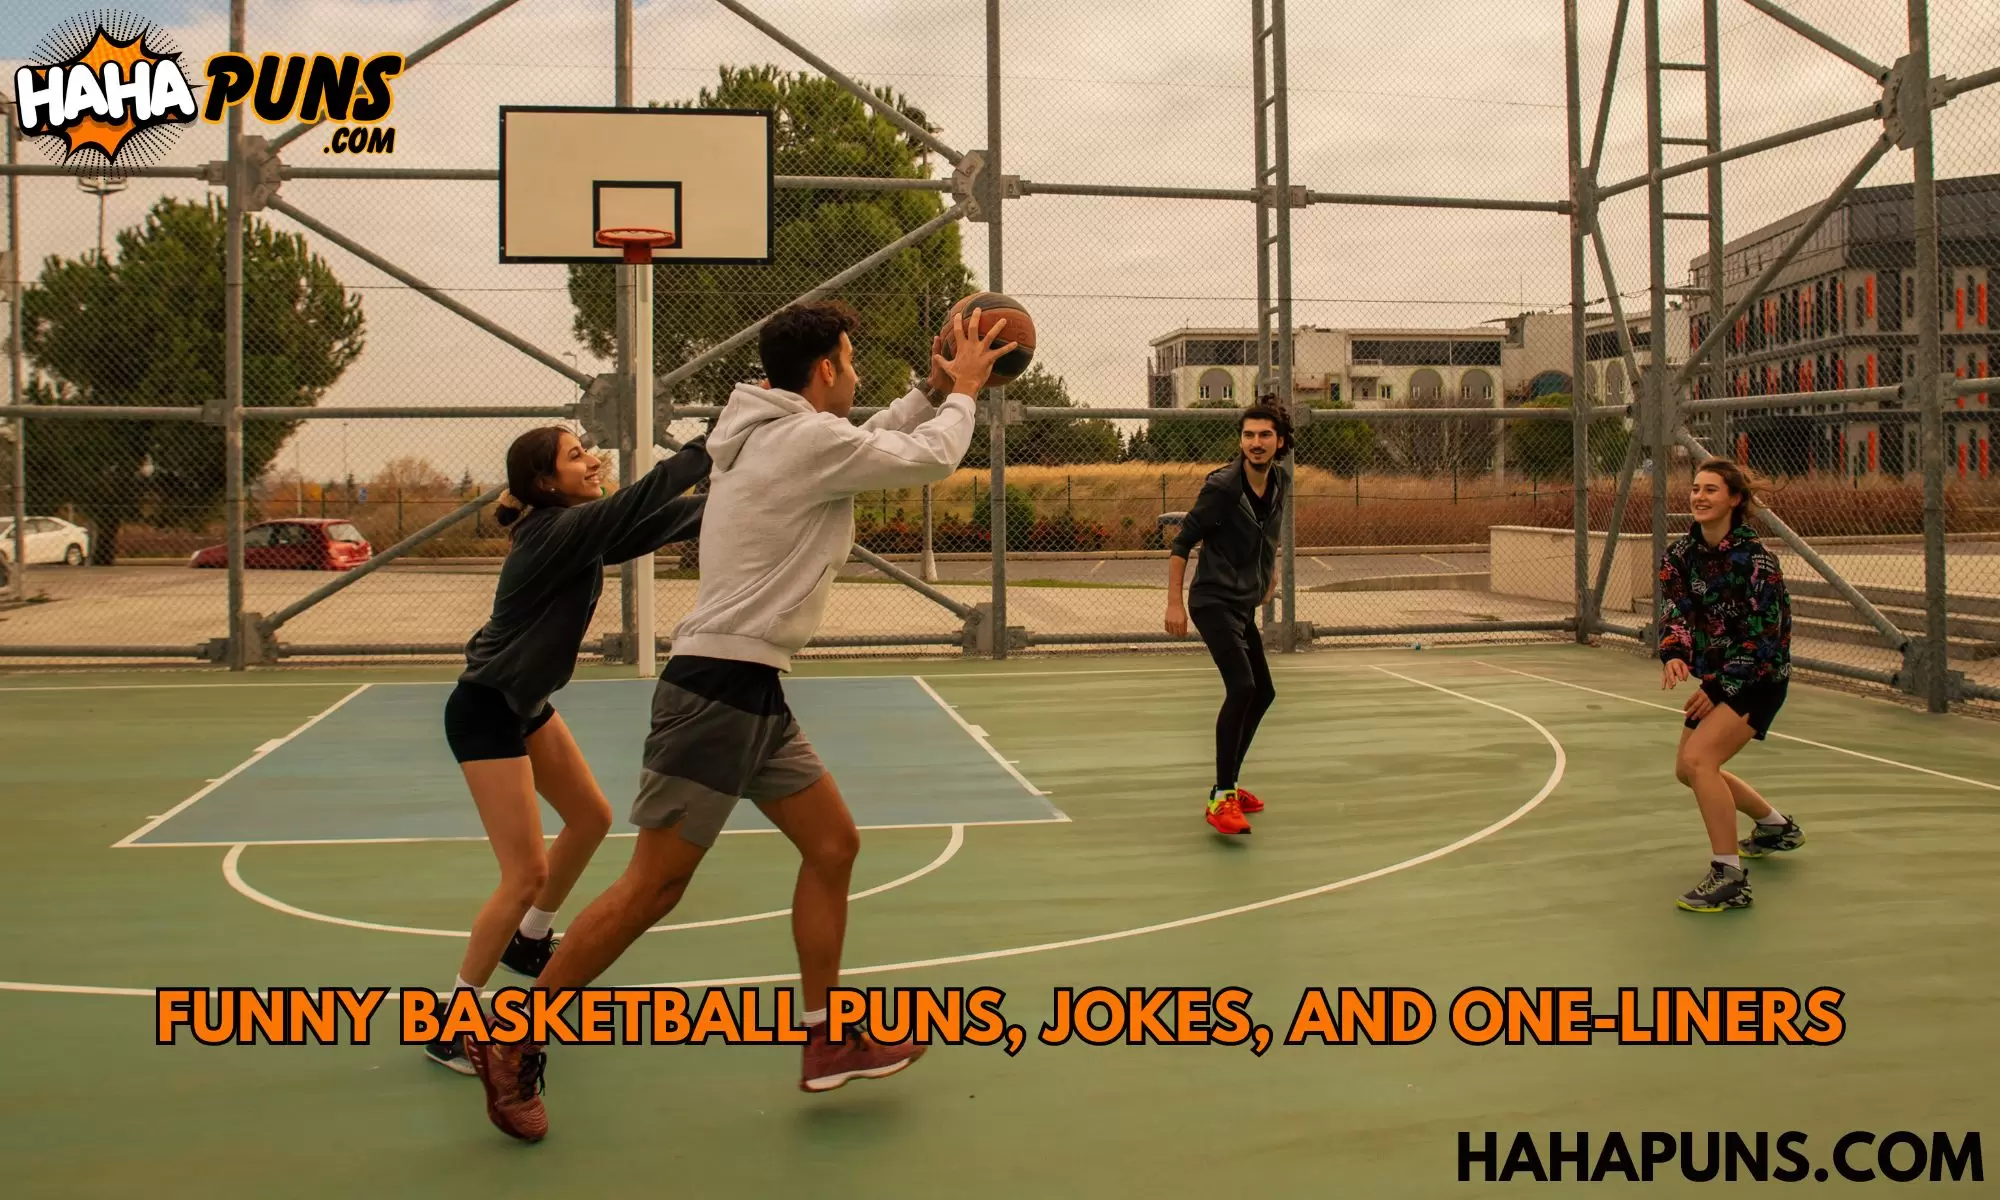 Funny Basketball Puns, Jokes, and One Liners